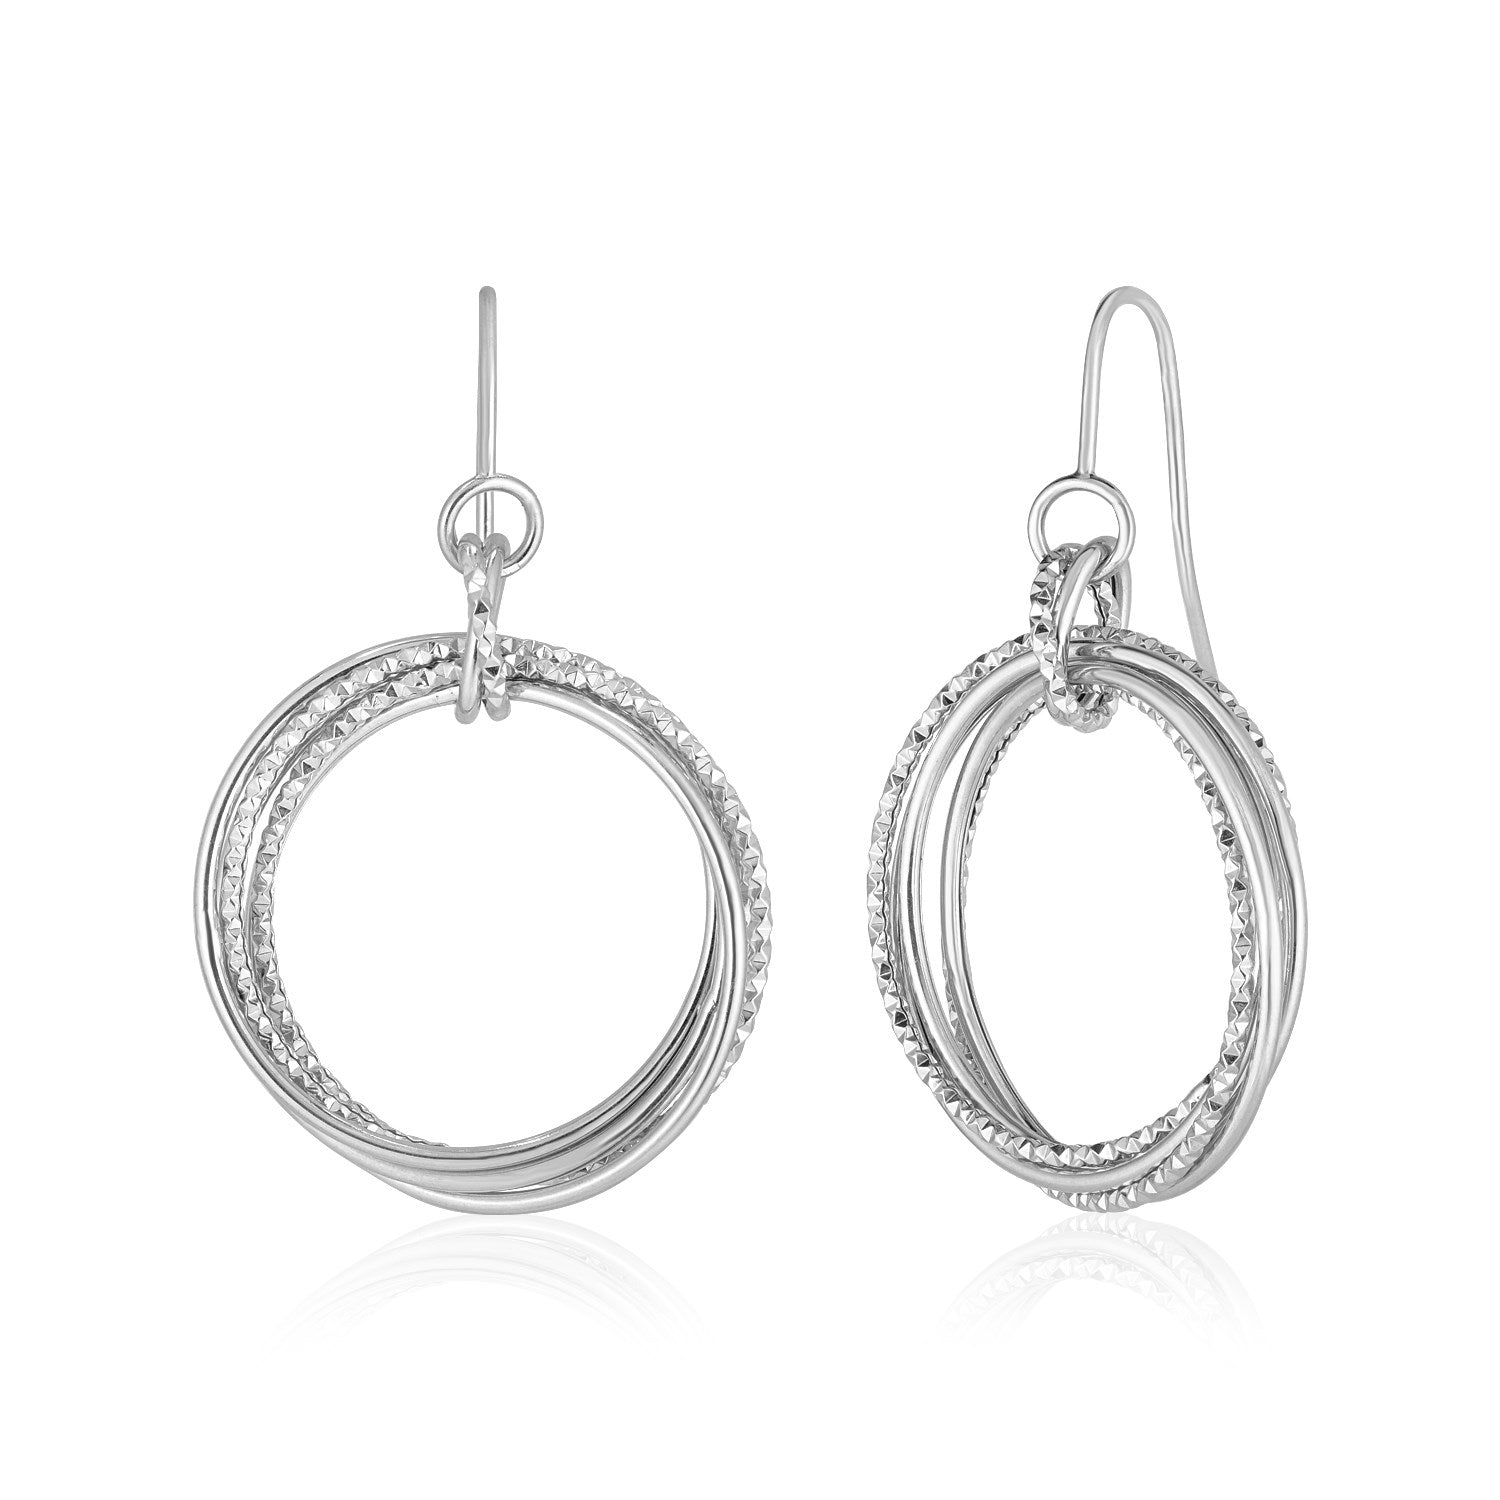 14k White Gold Earrings with Polished and Textured Interlocking Circle Dangles